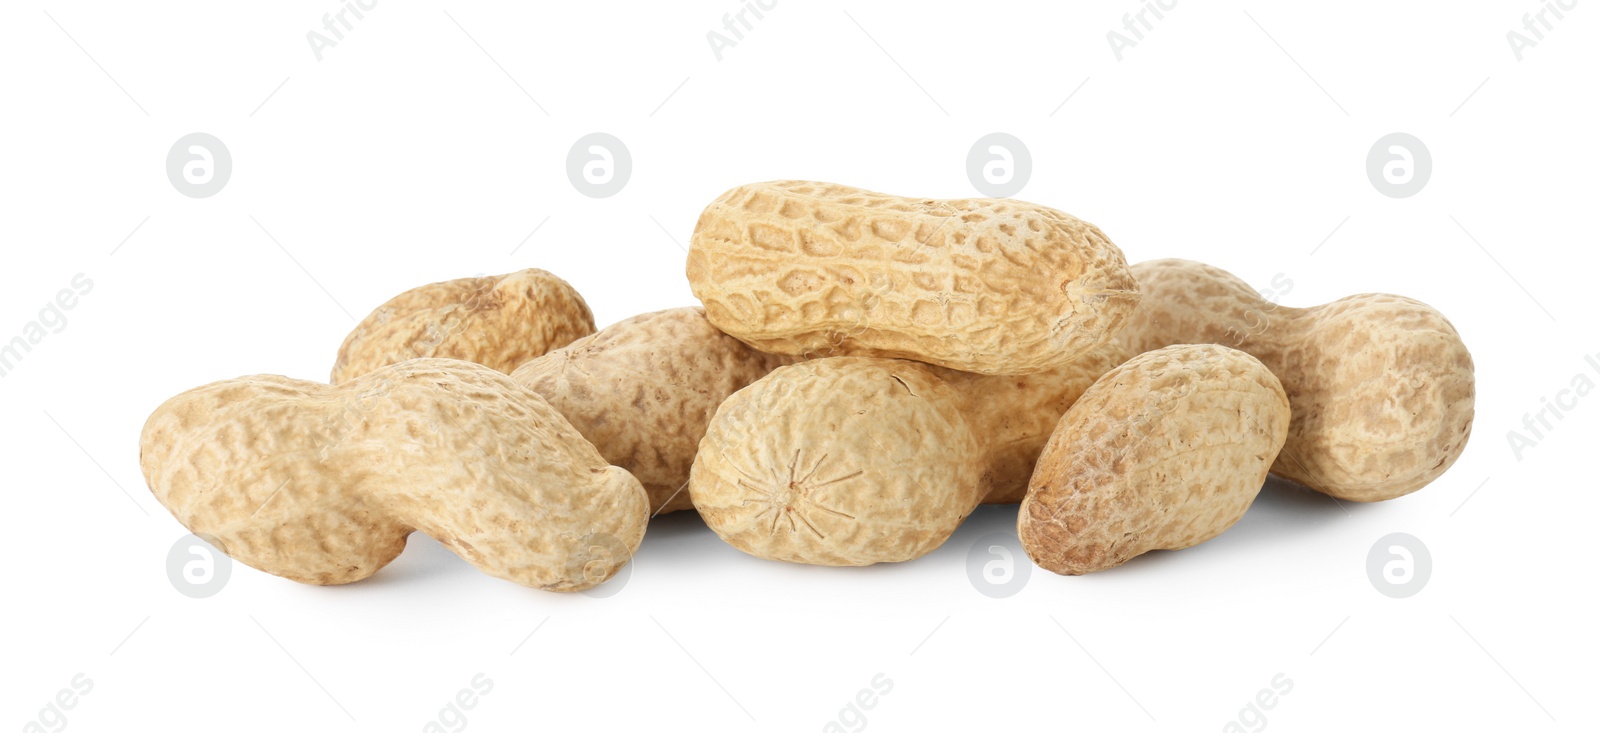 Photo of Pile of fresh unpeeled peanuts isolated on white